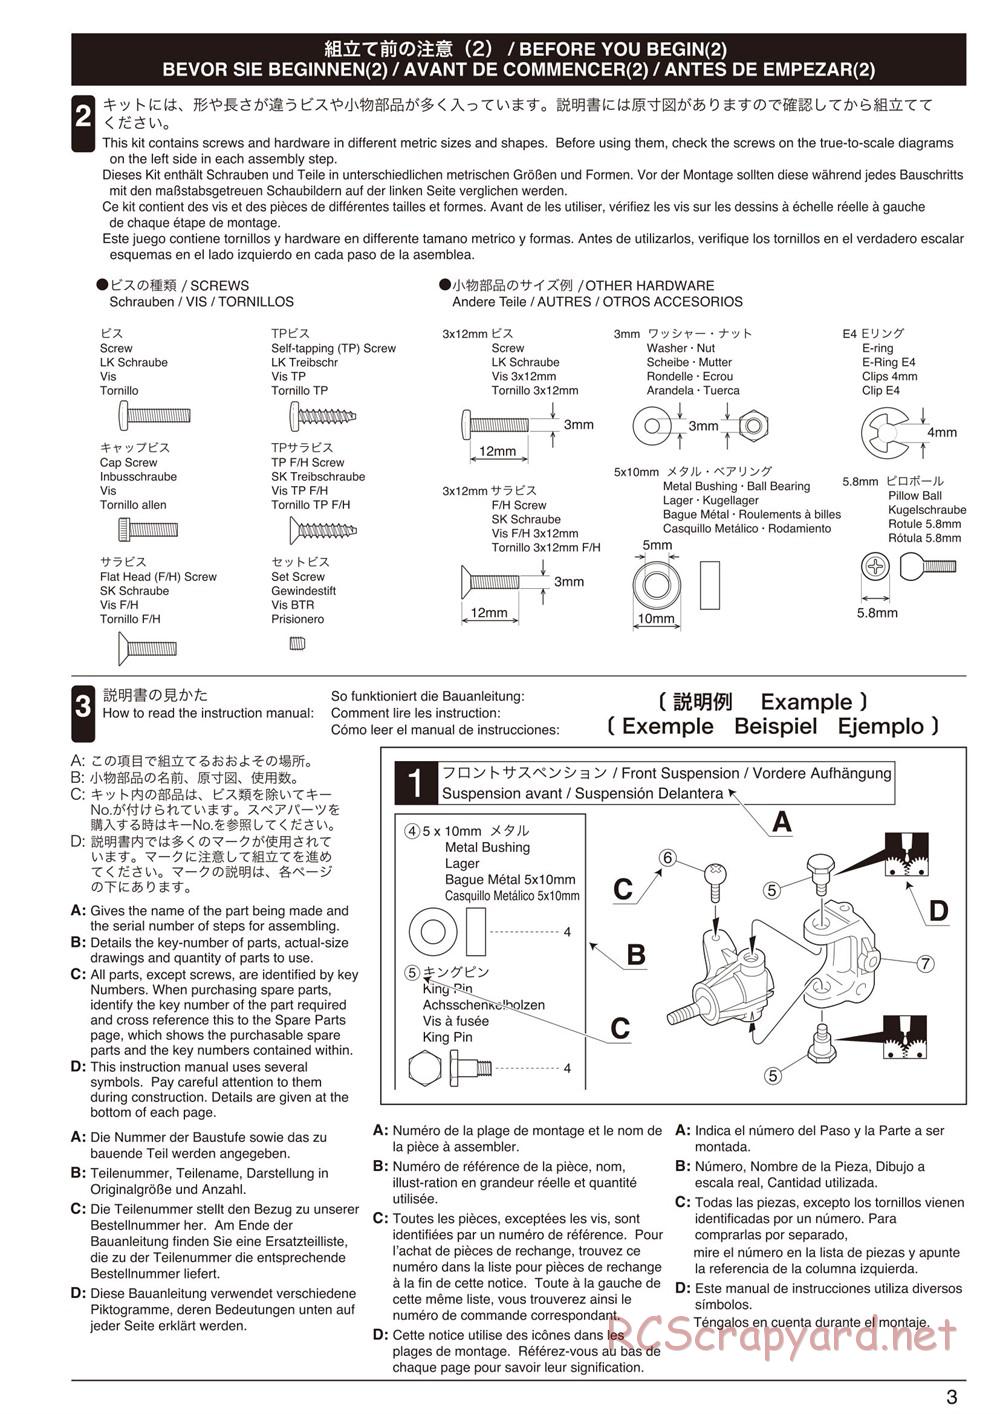 Kyosho - Mad Force Cruiser - Manual - Page 3